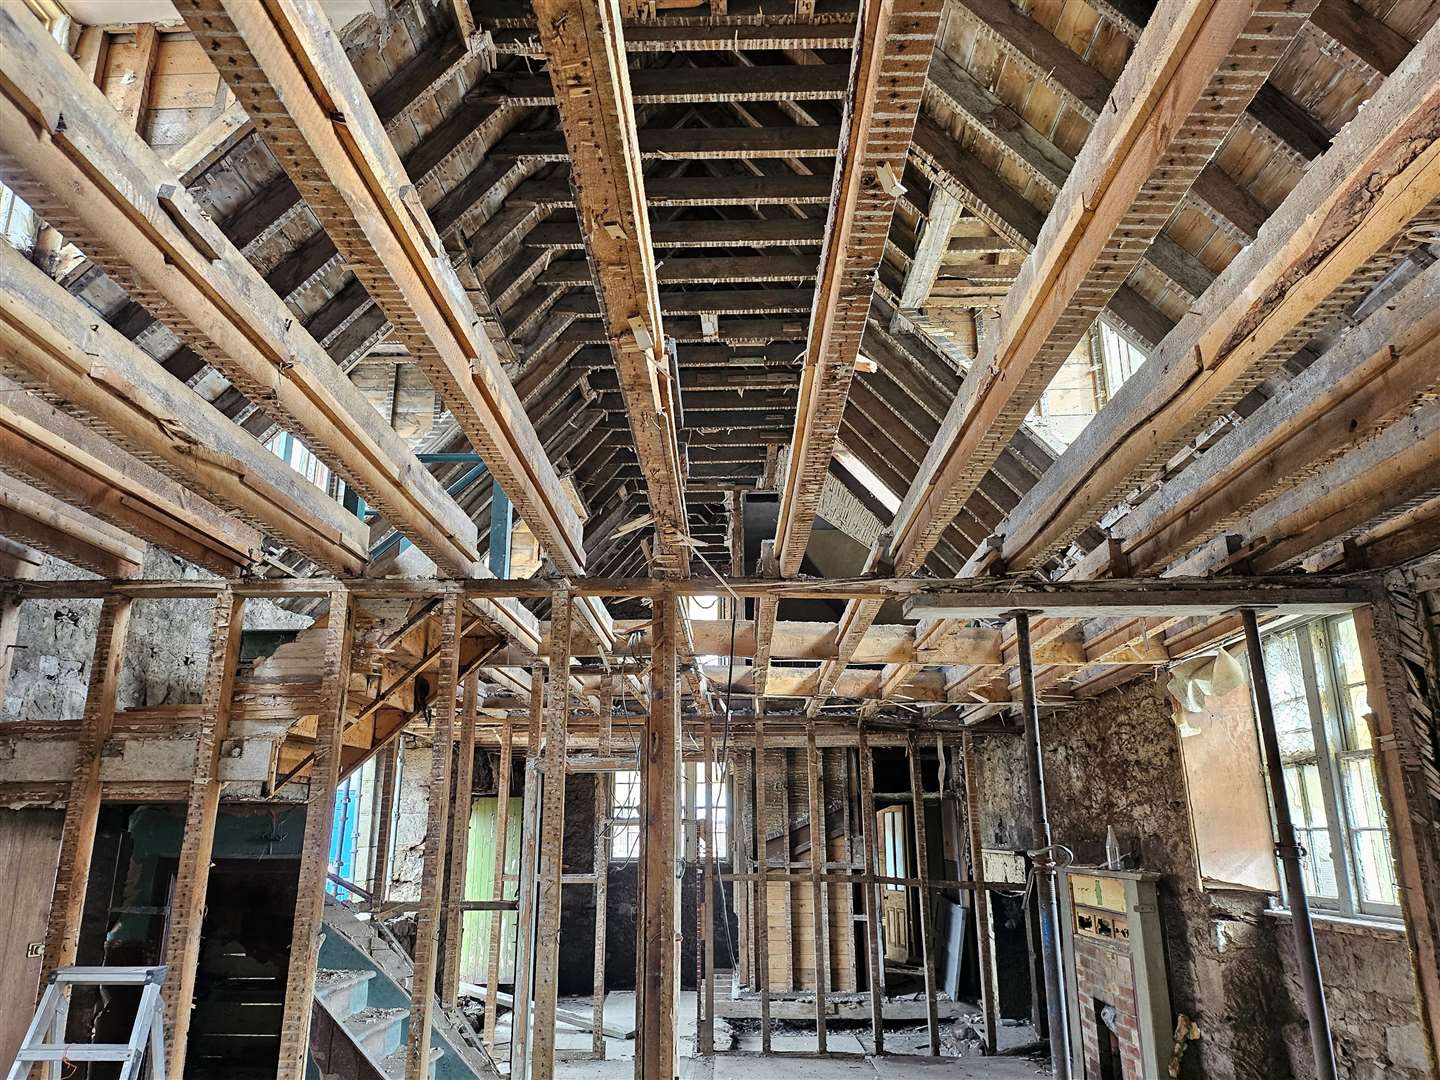 The interior of the building has been stripped out, with the floorboards and joints removed as well as the 1903 partition walls and lath on plaster walls.